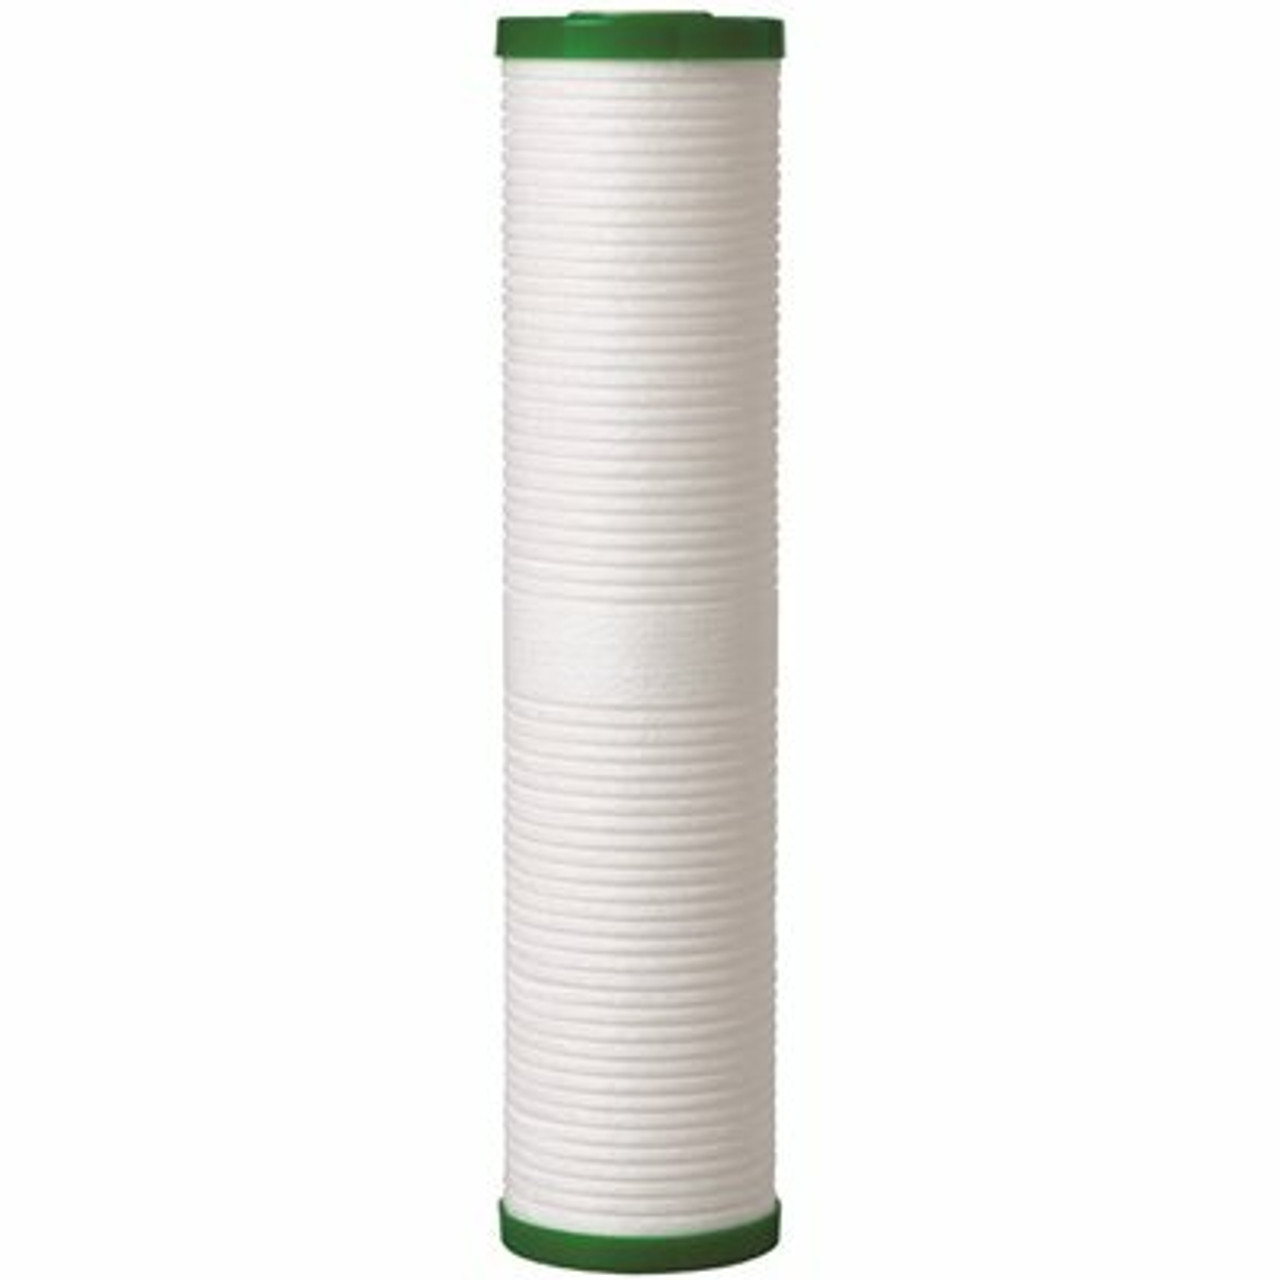 3M Whole House Large Sump Replacement Water Filter Drop-In Cartridge - 3563048